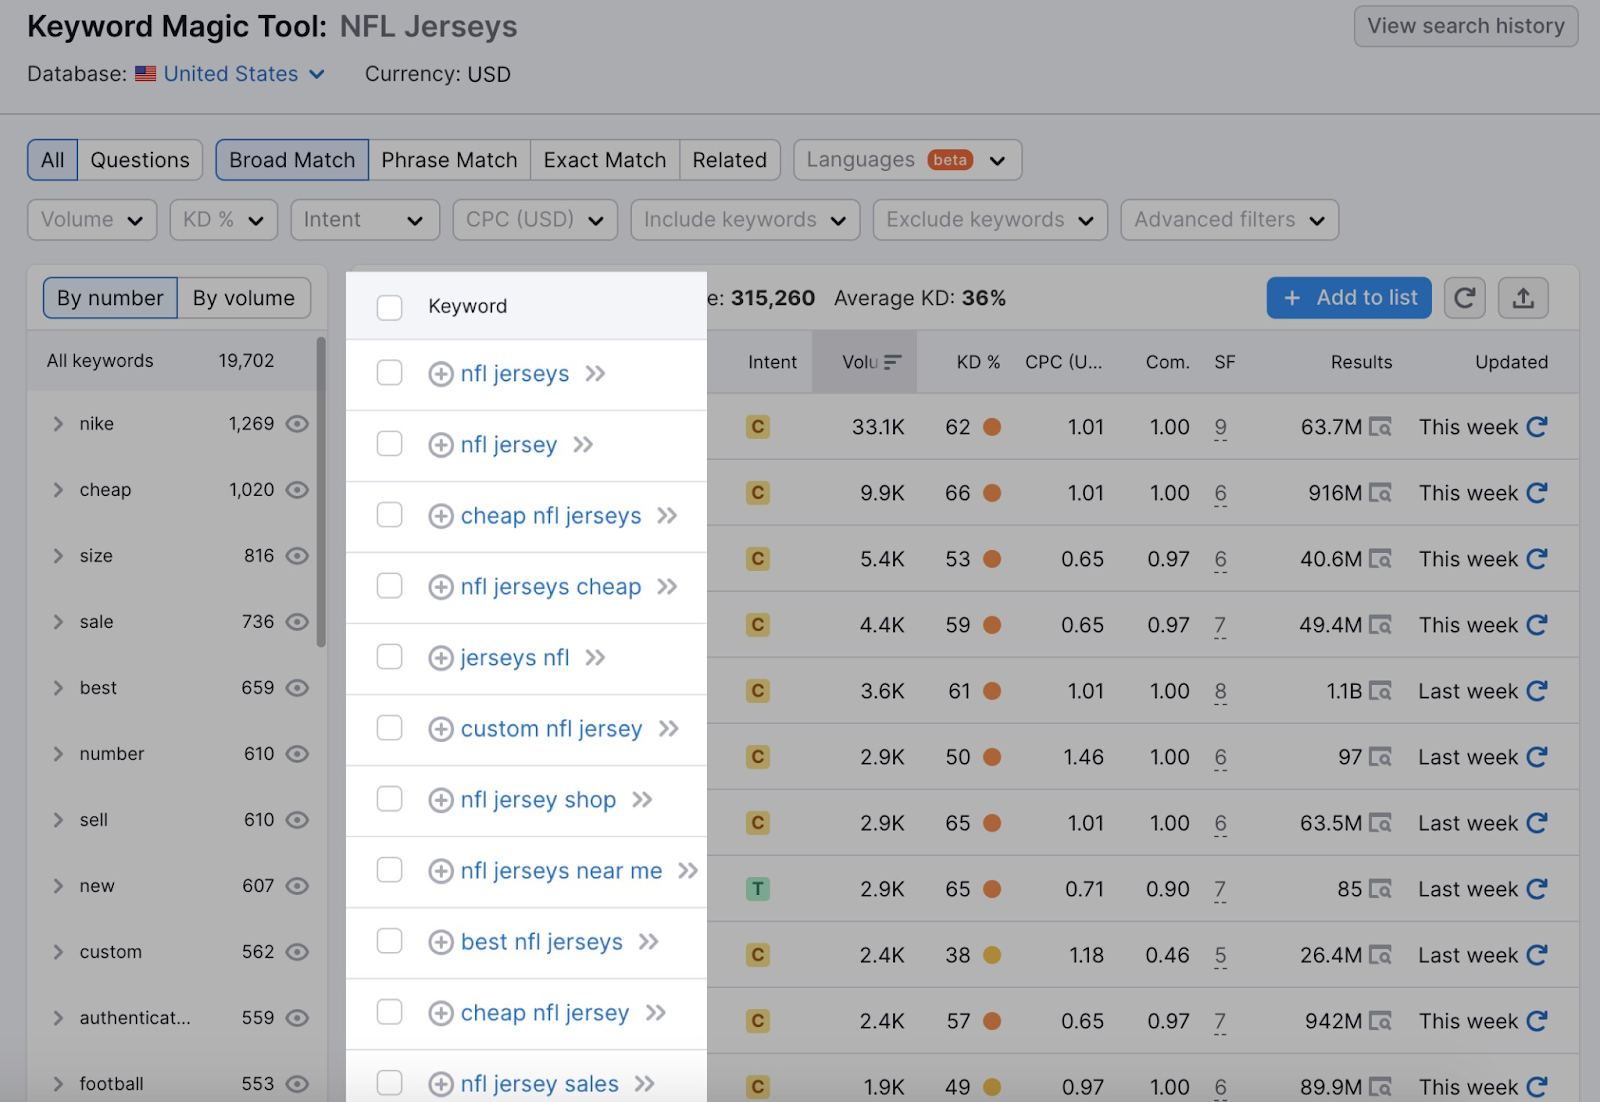 Keyword Magic tool results for "NFL Jerseys" search